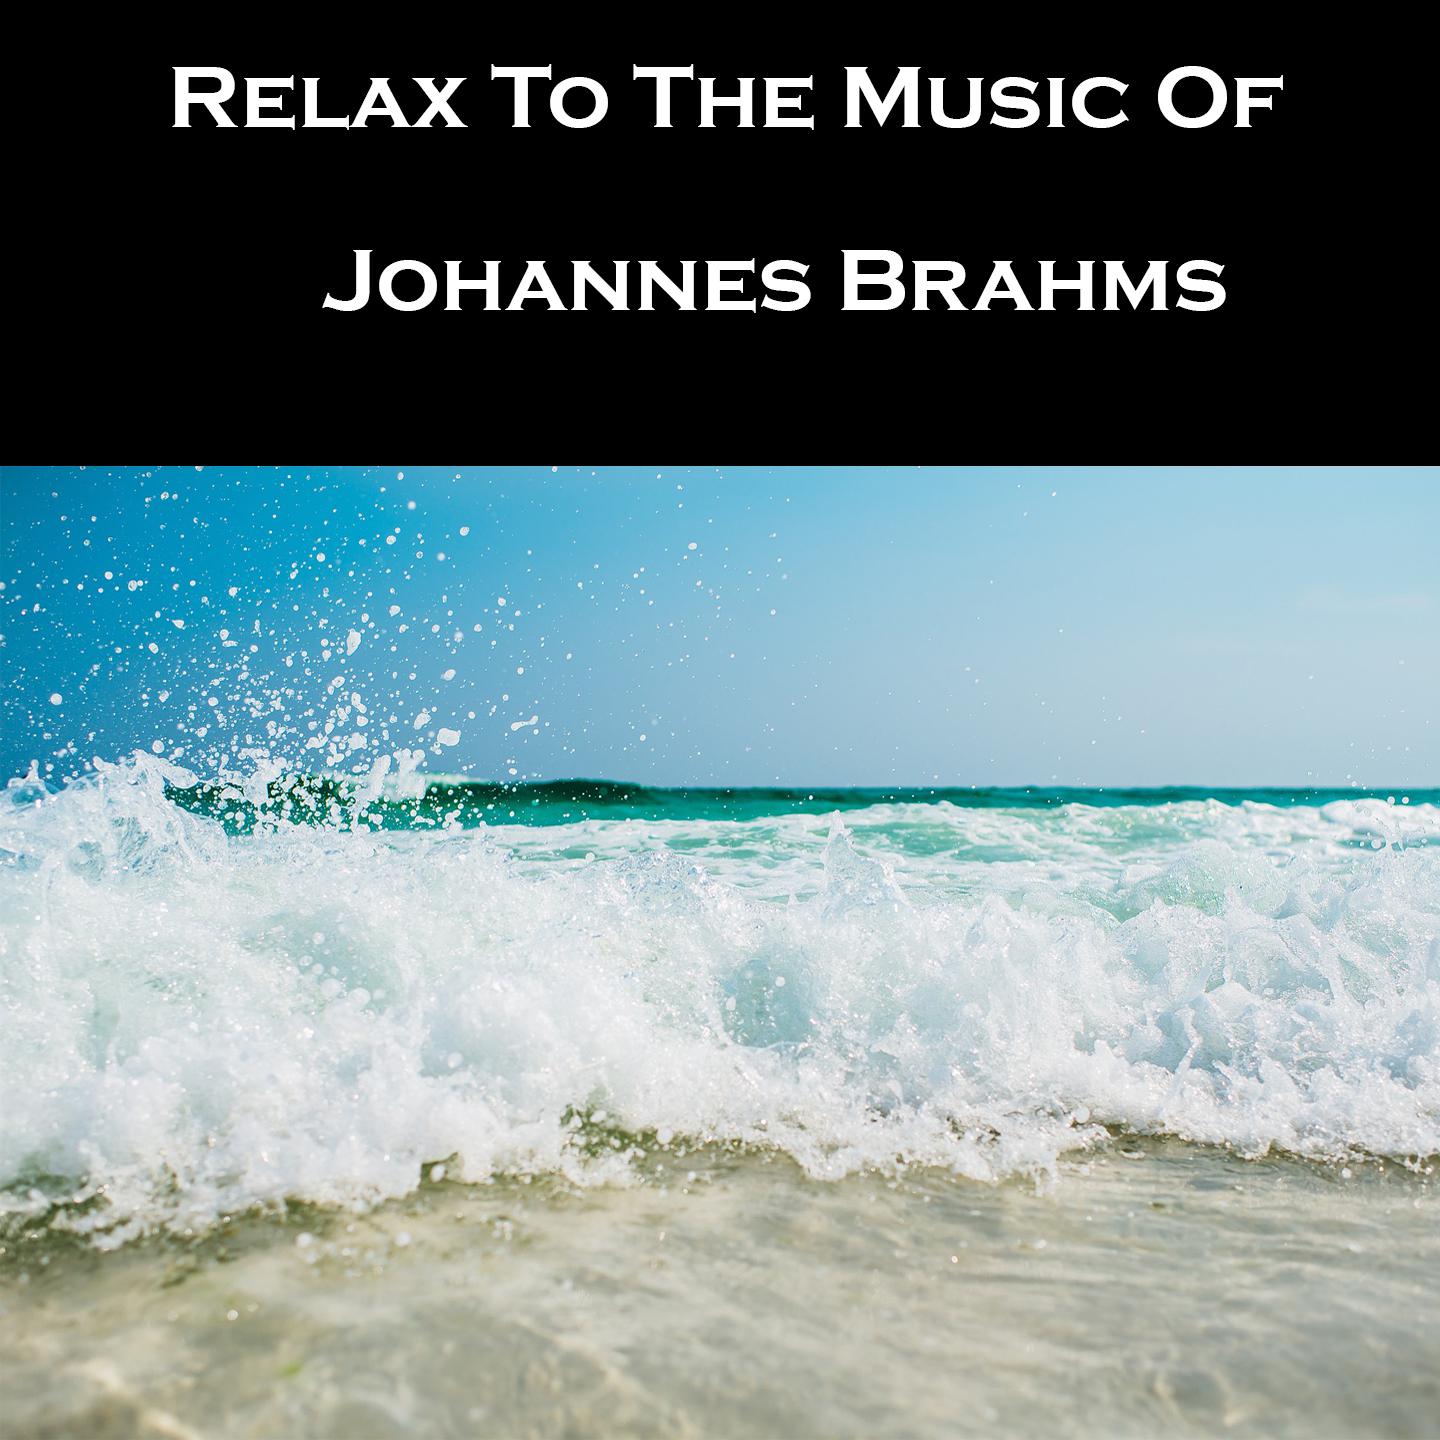 Relax To The Music Of Johannes Brahms